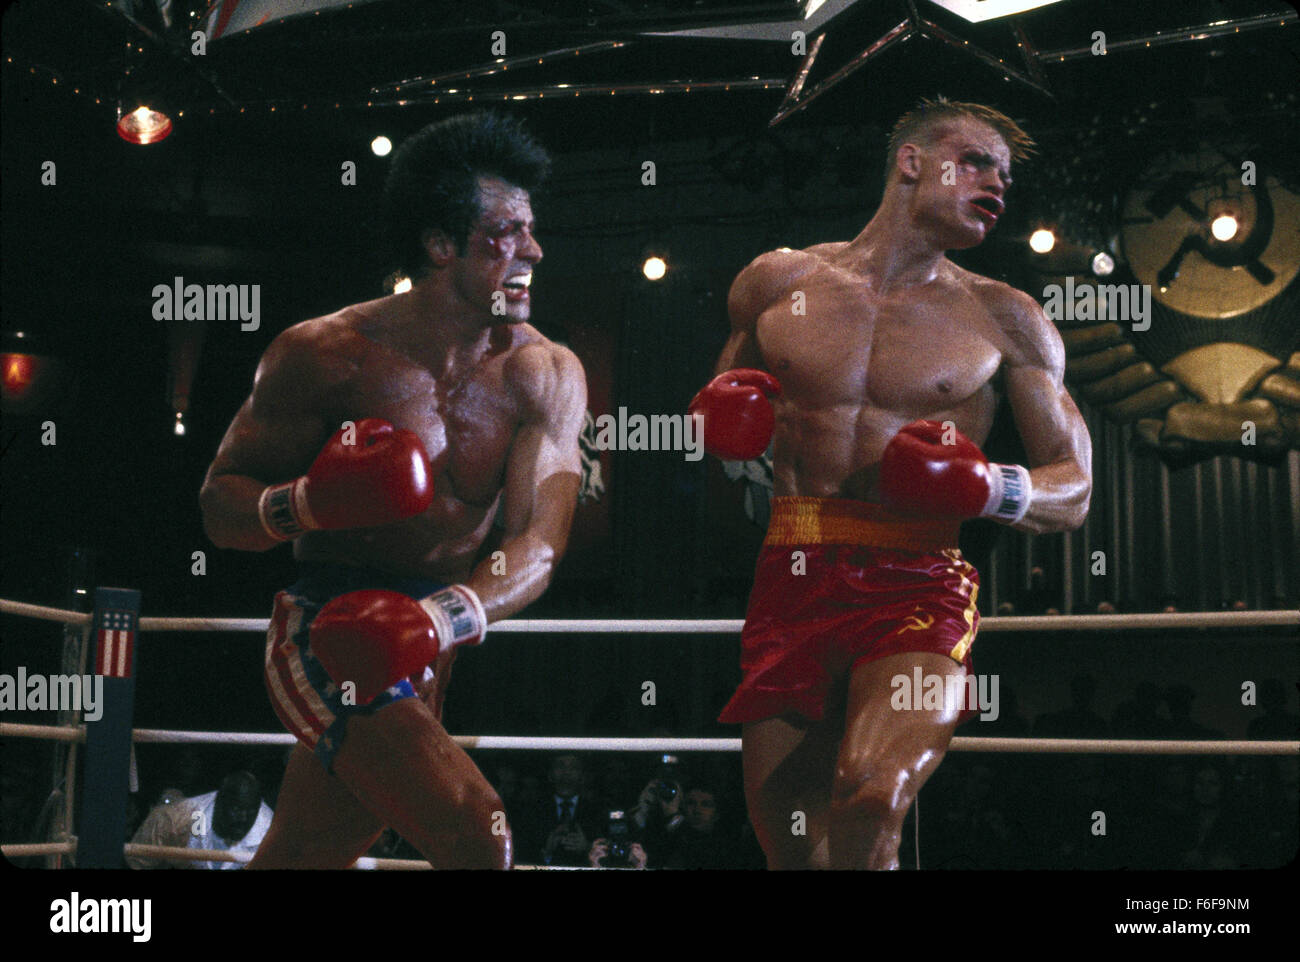 RELEASE DATE: November 27, 1985  MOVIE TITLE: Rocky IV  DIRECTOR: Sylvester Stallone  STUDIO: MGM  PLOT: Rocky Balboa, heavyweight champion of the world, is the trainer for Apollo Creed in an exhibition match against Ivan Drago, a ''superman'' boxer from the Soviet Union. When Apollo is killed in the ring by the brutal Drago, Balboa blames himself and promises to avenge his friend's death in the ring  PICTURED: SYLVESTER STALLONE as Rocky Balboa and DOLPH LUNDGREN as Ivan Drago  (Credit Image: c MGM/Entertainment Pictures) Stock Photo